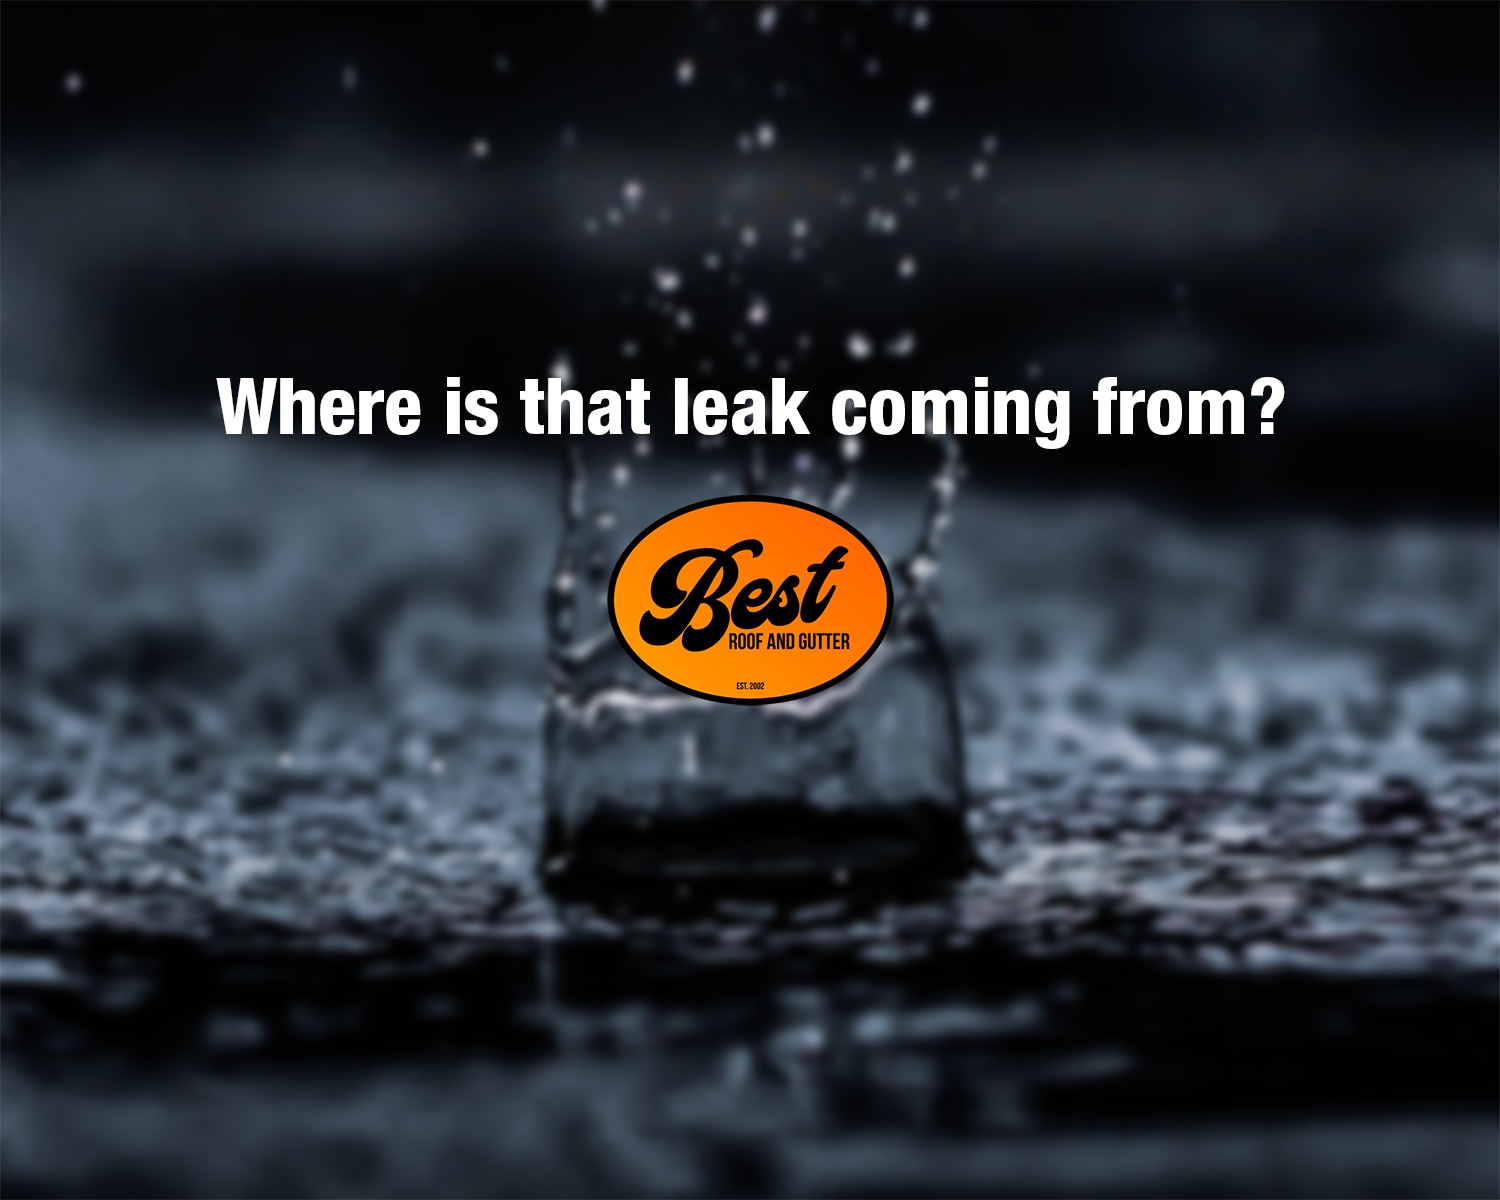 Where is that leak coming from?